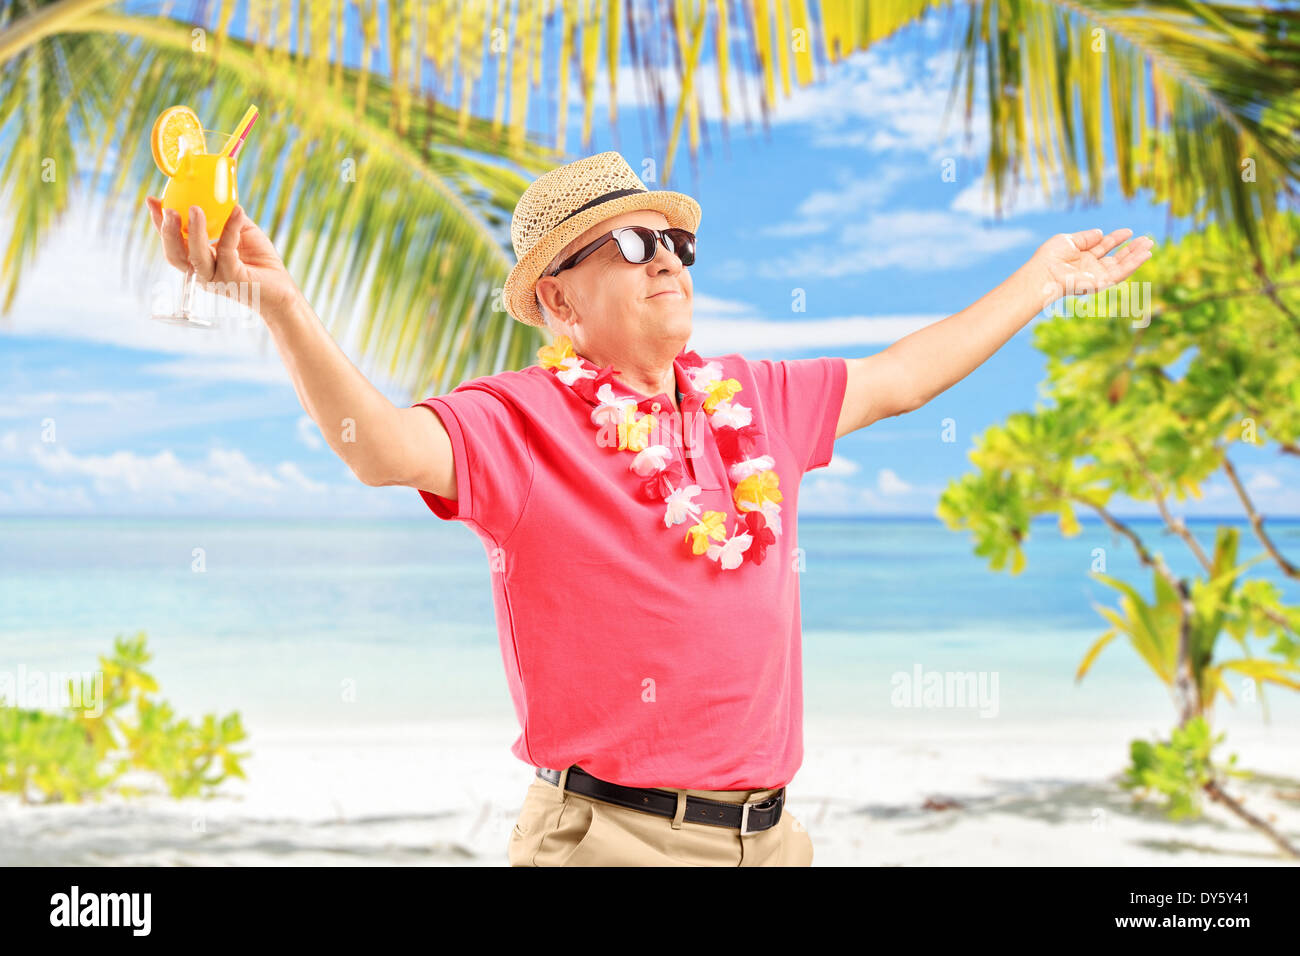 mature-man-holding-a-cocktail-and-gesturing-joy-on-a-sunny-beach-DY5Y41.jpg